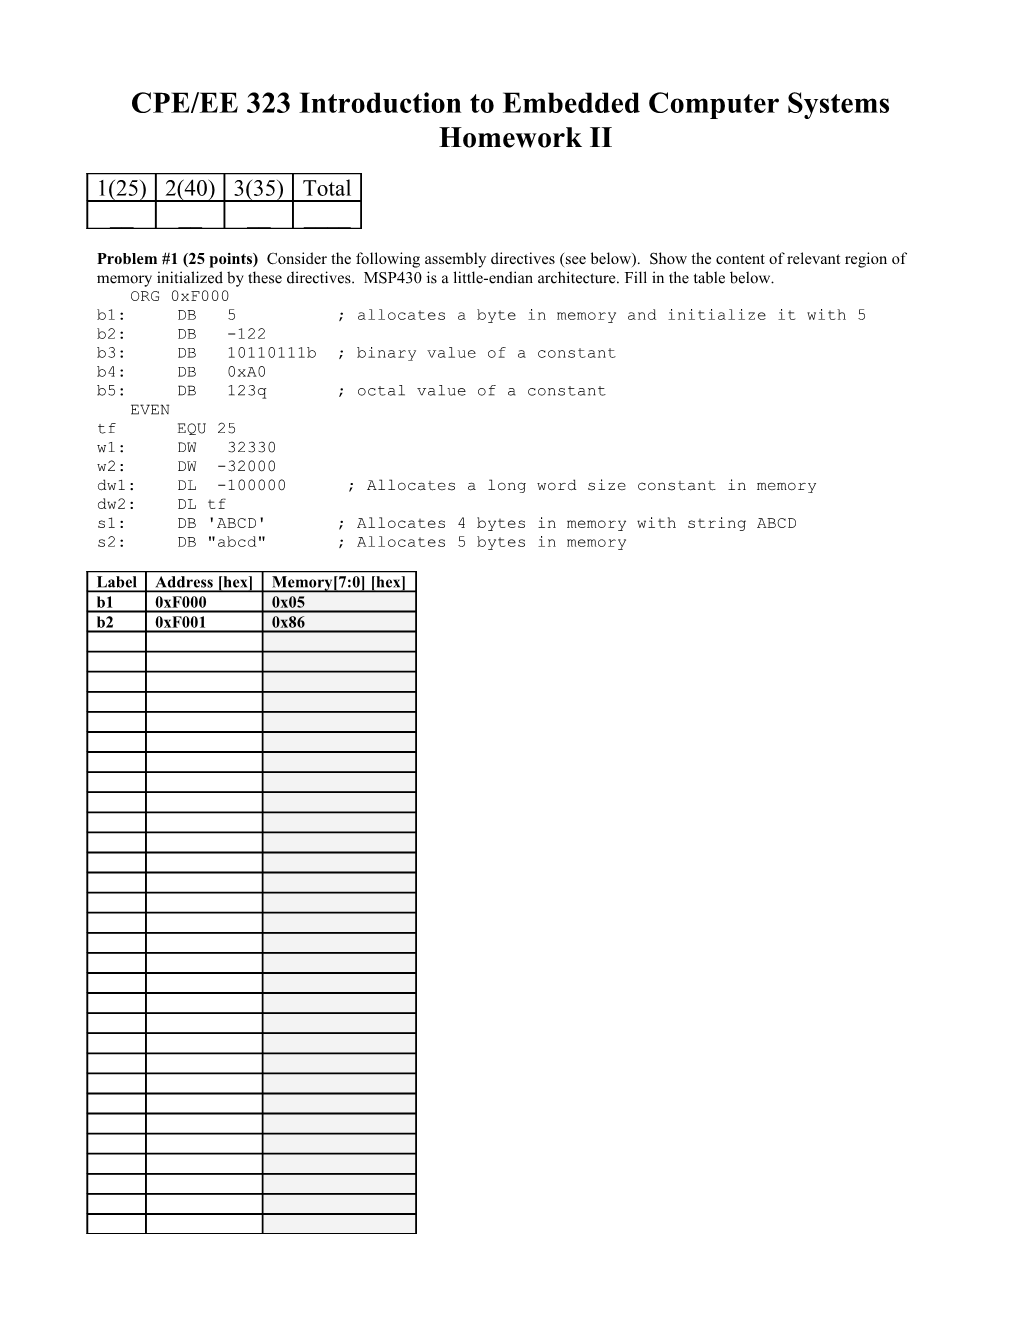 CPE/EE 323 Introduction to Embedded Computer Systems Homework II